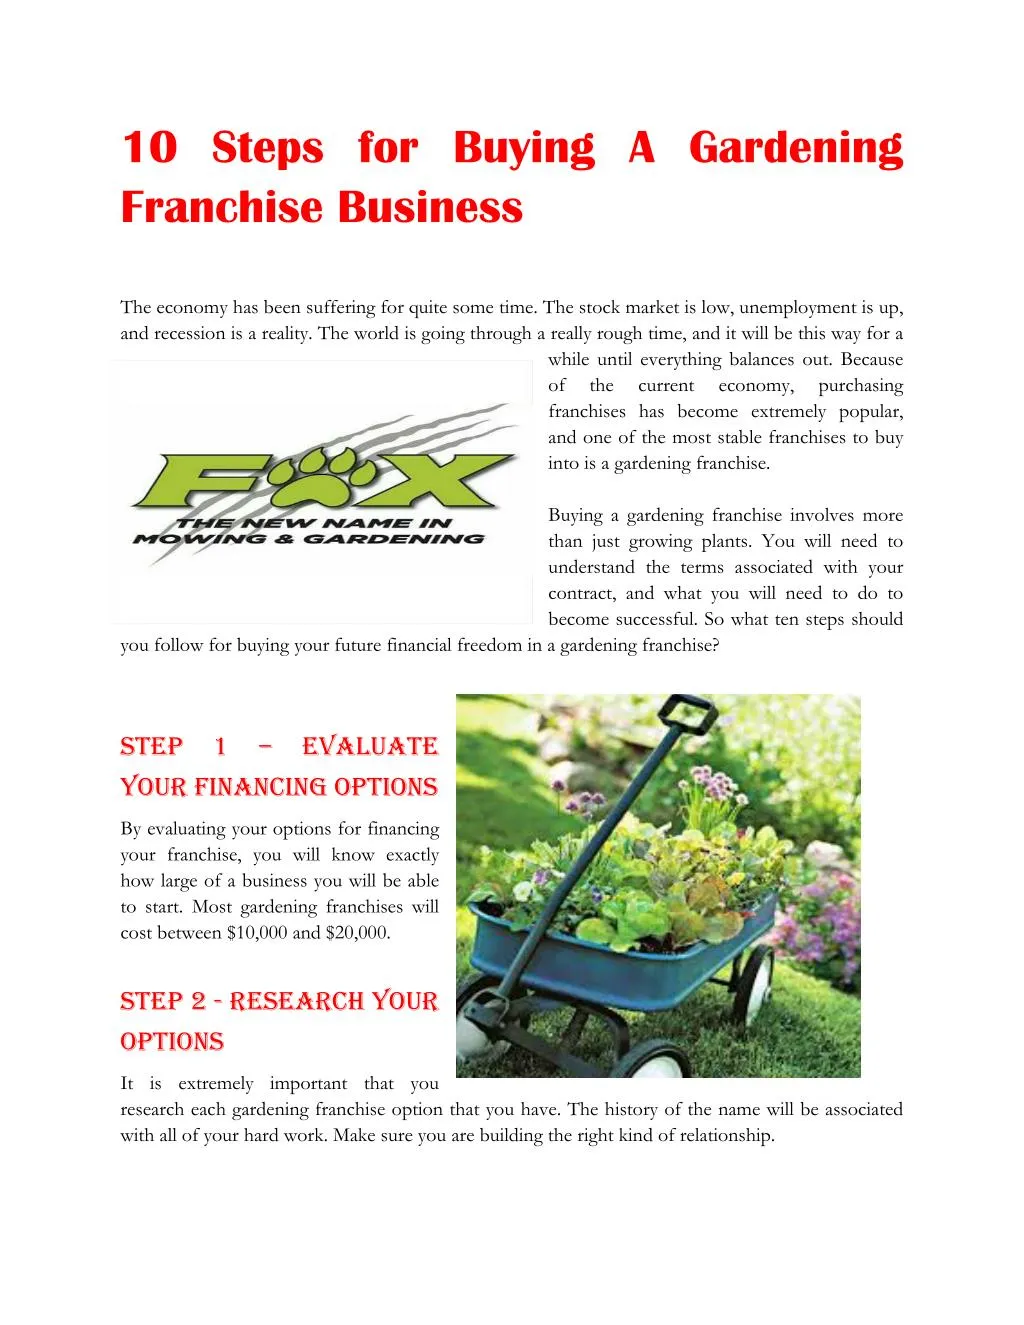 10 steps for buying a gardening franchise